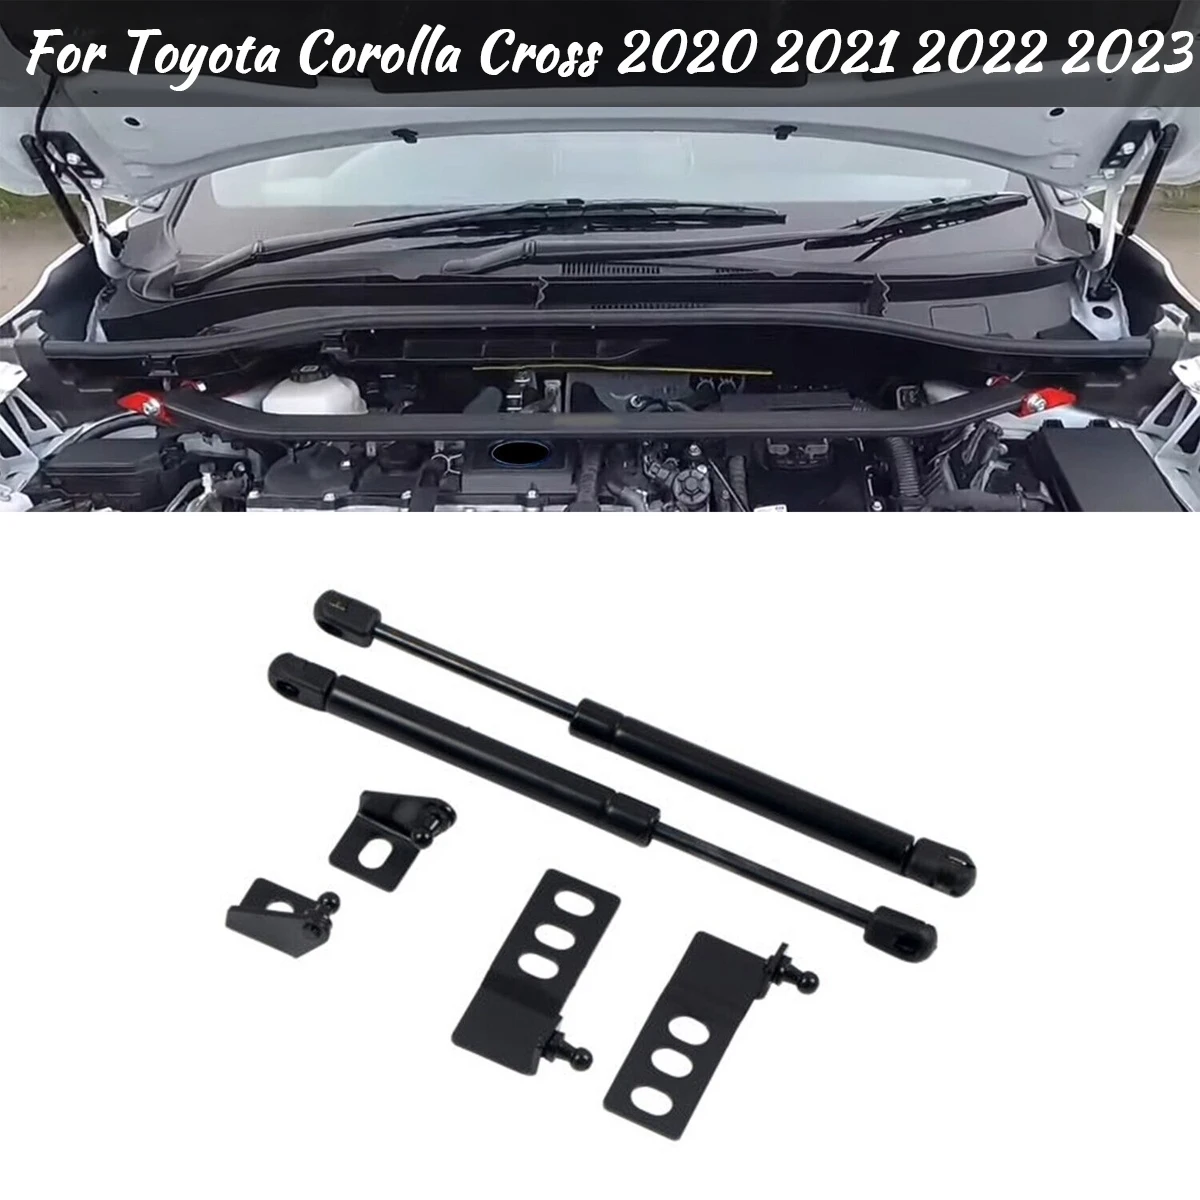 

For Toyota Corolla Cross 2020 2021 2022 2023 Front Hood Bonnet Gas Strut Spring Shock Hydraulic Rod Lift Support Car Accessories